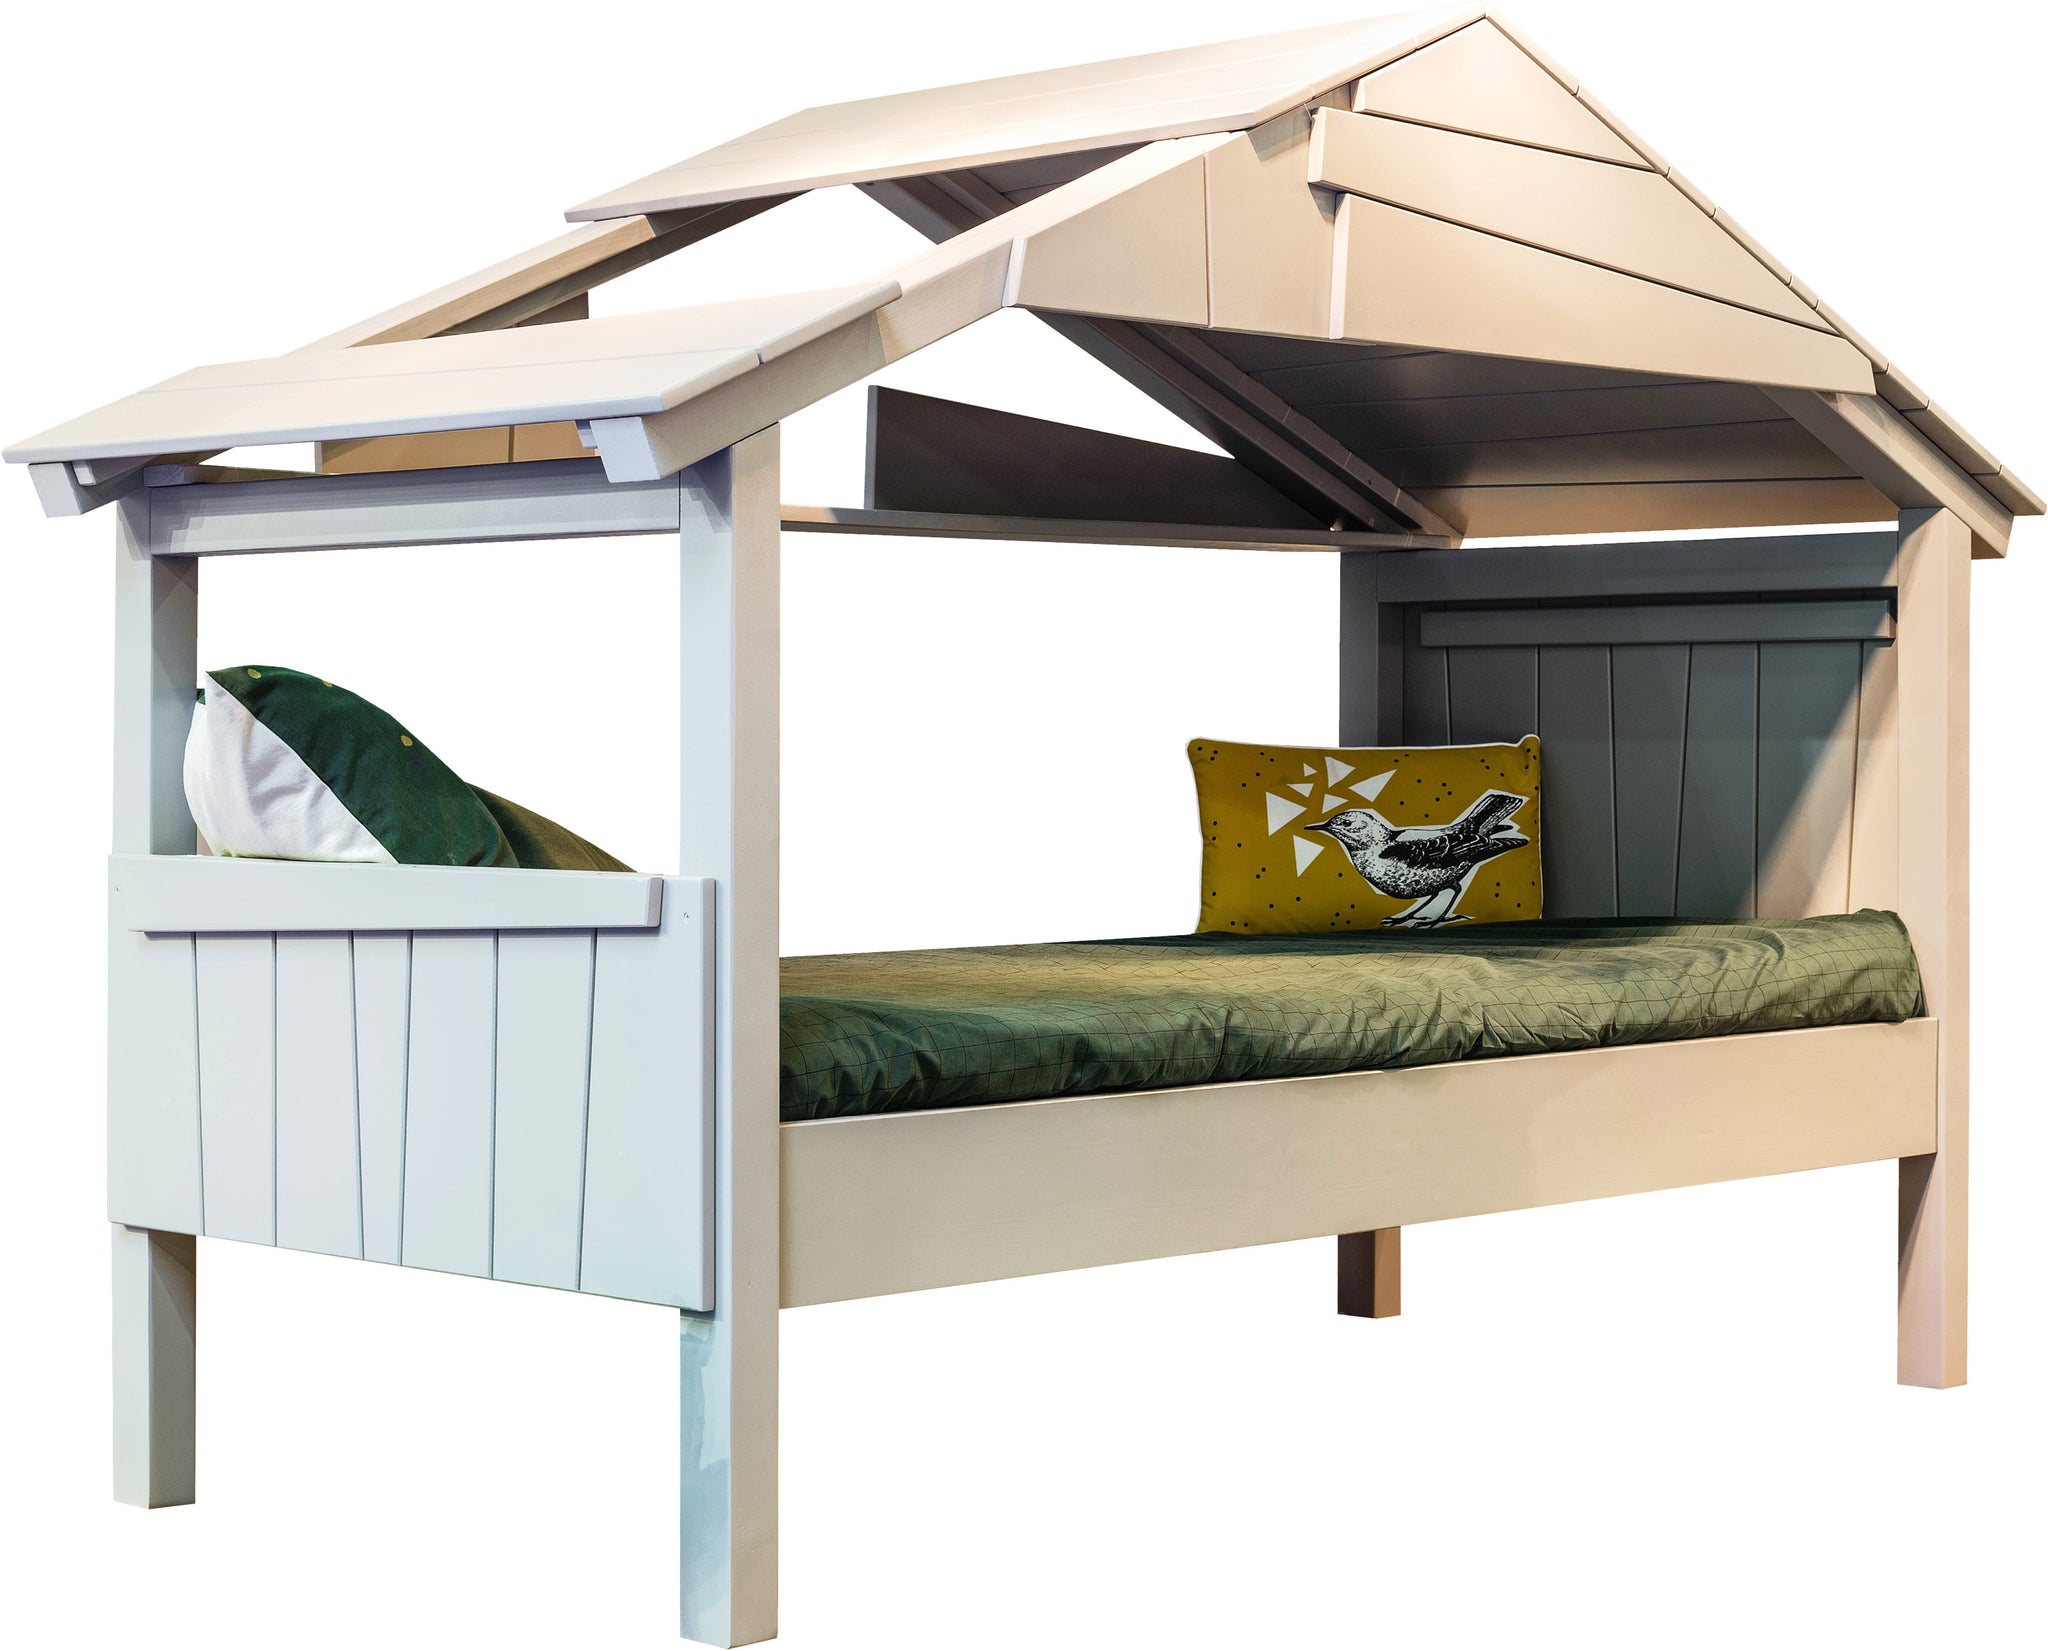 Star Treehouse Bed - Mathy By Bols